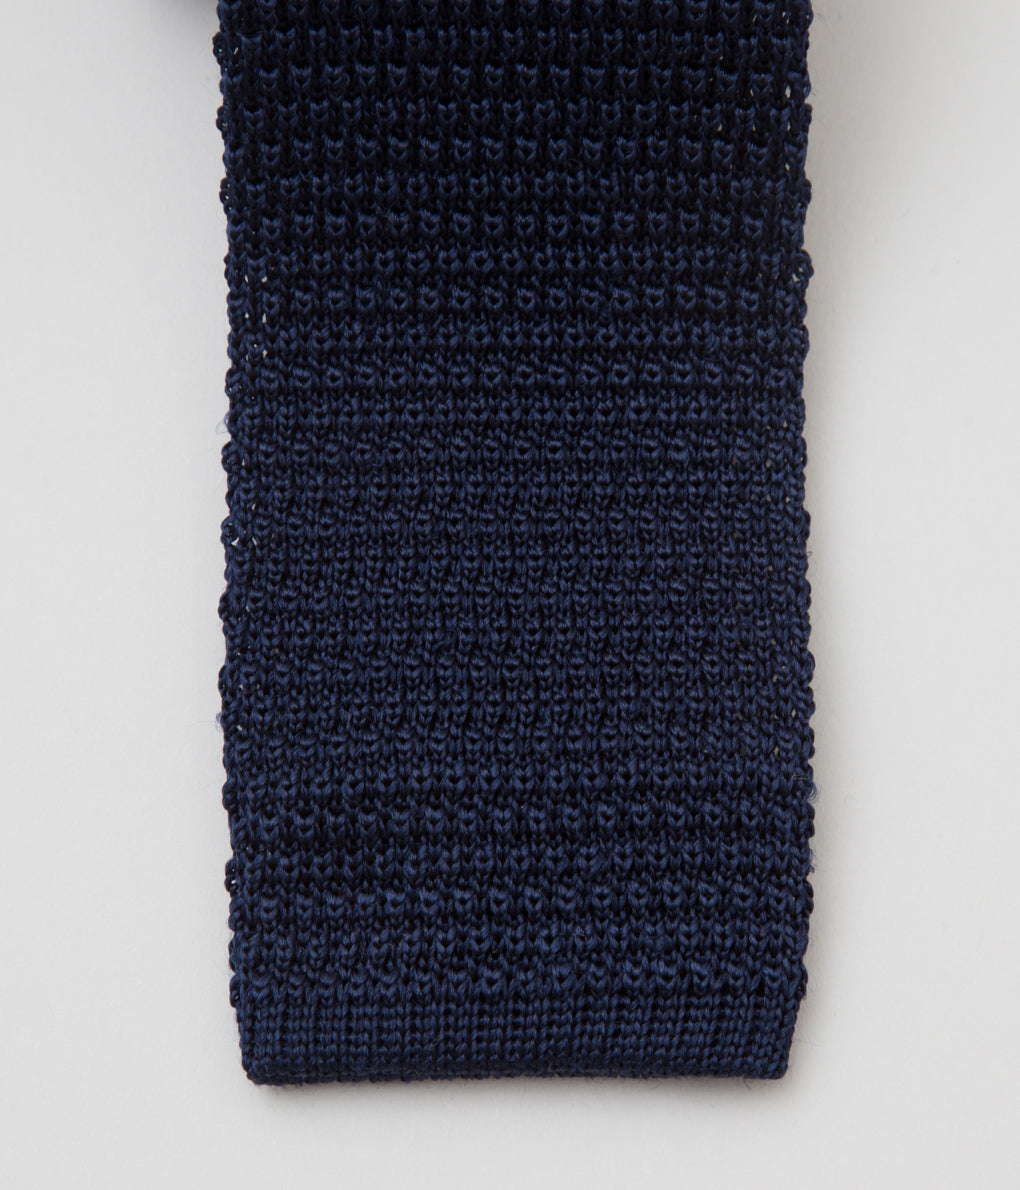 INDIVIDUALIZED ACCESSORIES "KNIT TIE" (NAVY)